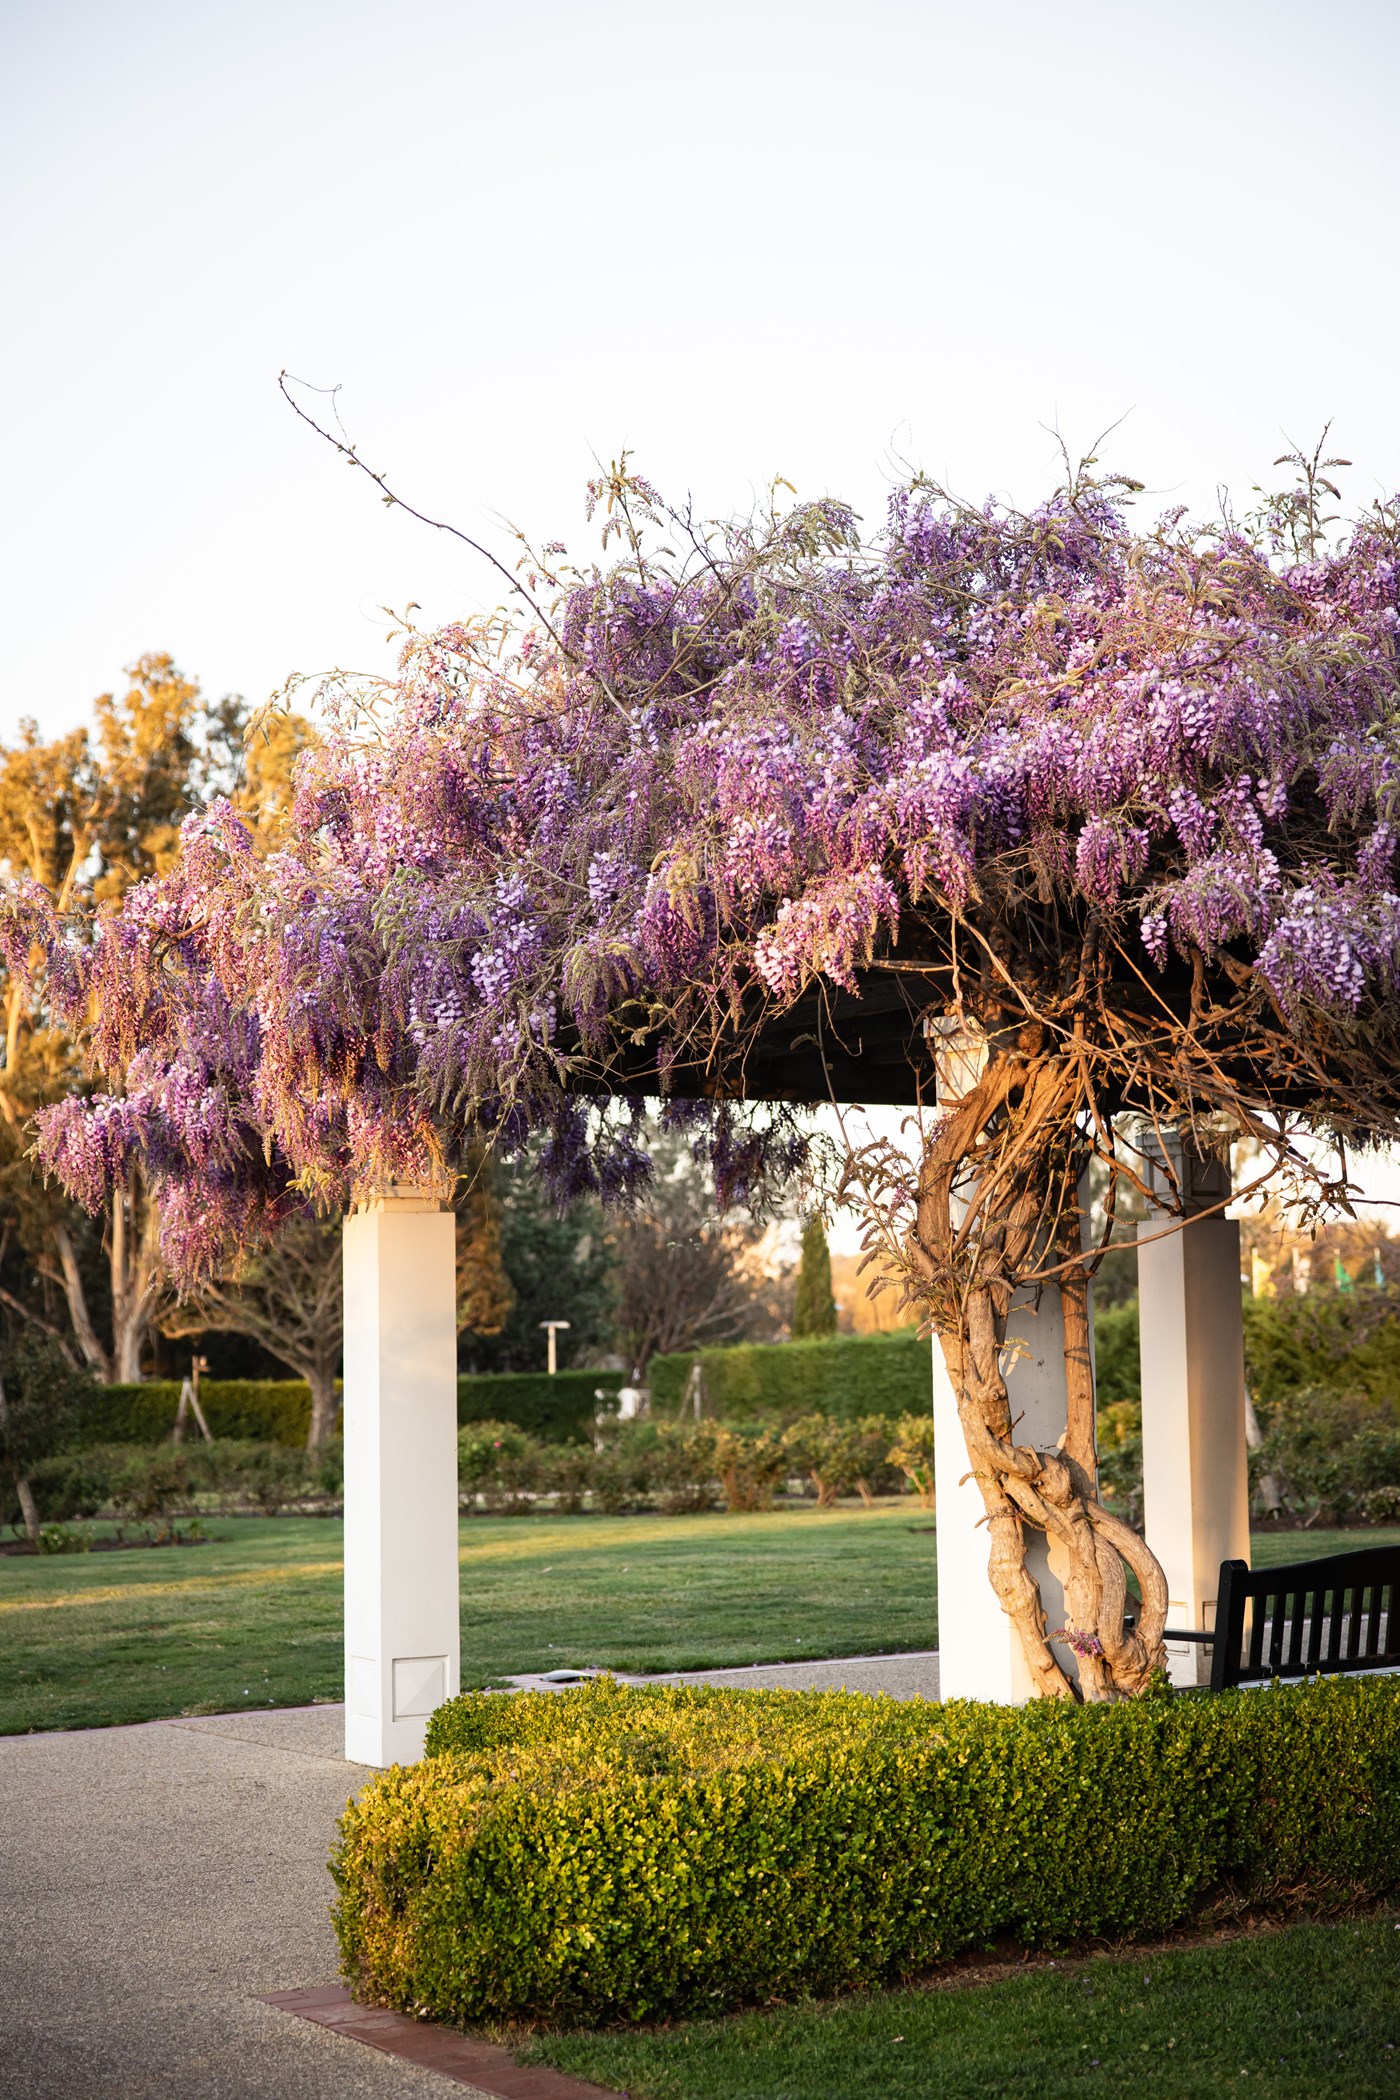 Purple wisteria creates a canopy over a rotunda with white pillars inside the Old Parliament Gardens Canberra